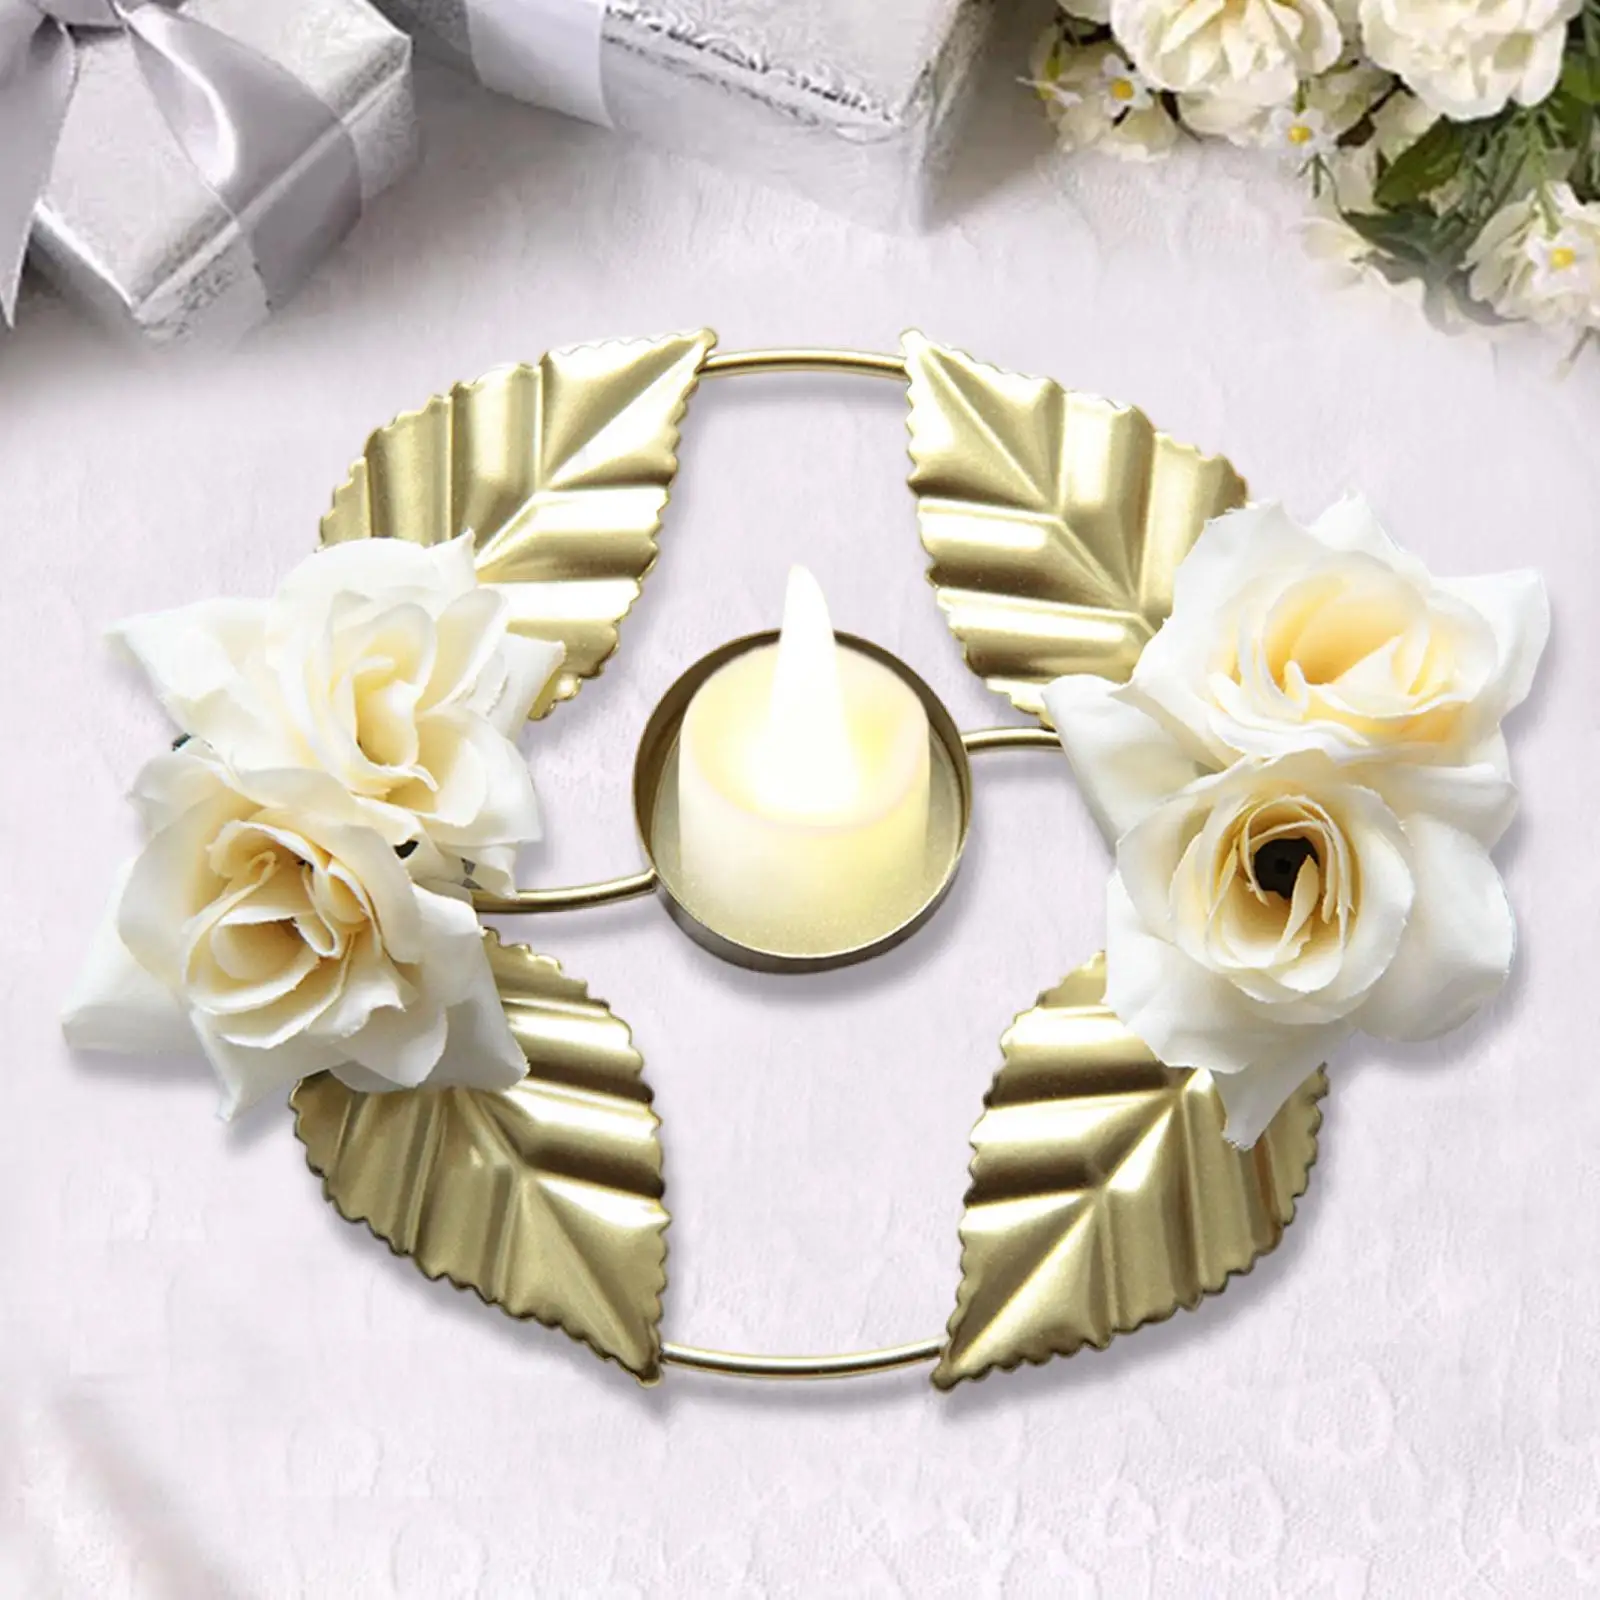 Wreaths Candle Rings Simulated Rose Rustic Pillar Candle Rings for Home Decoration Wedding Bedroom Christmas Gathering